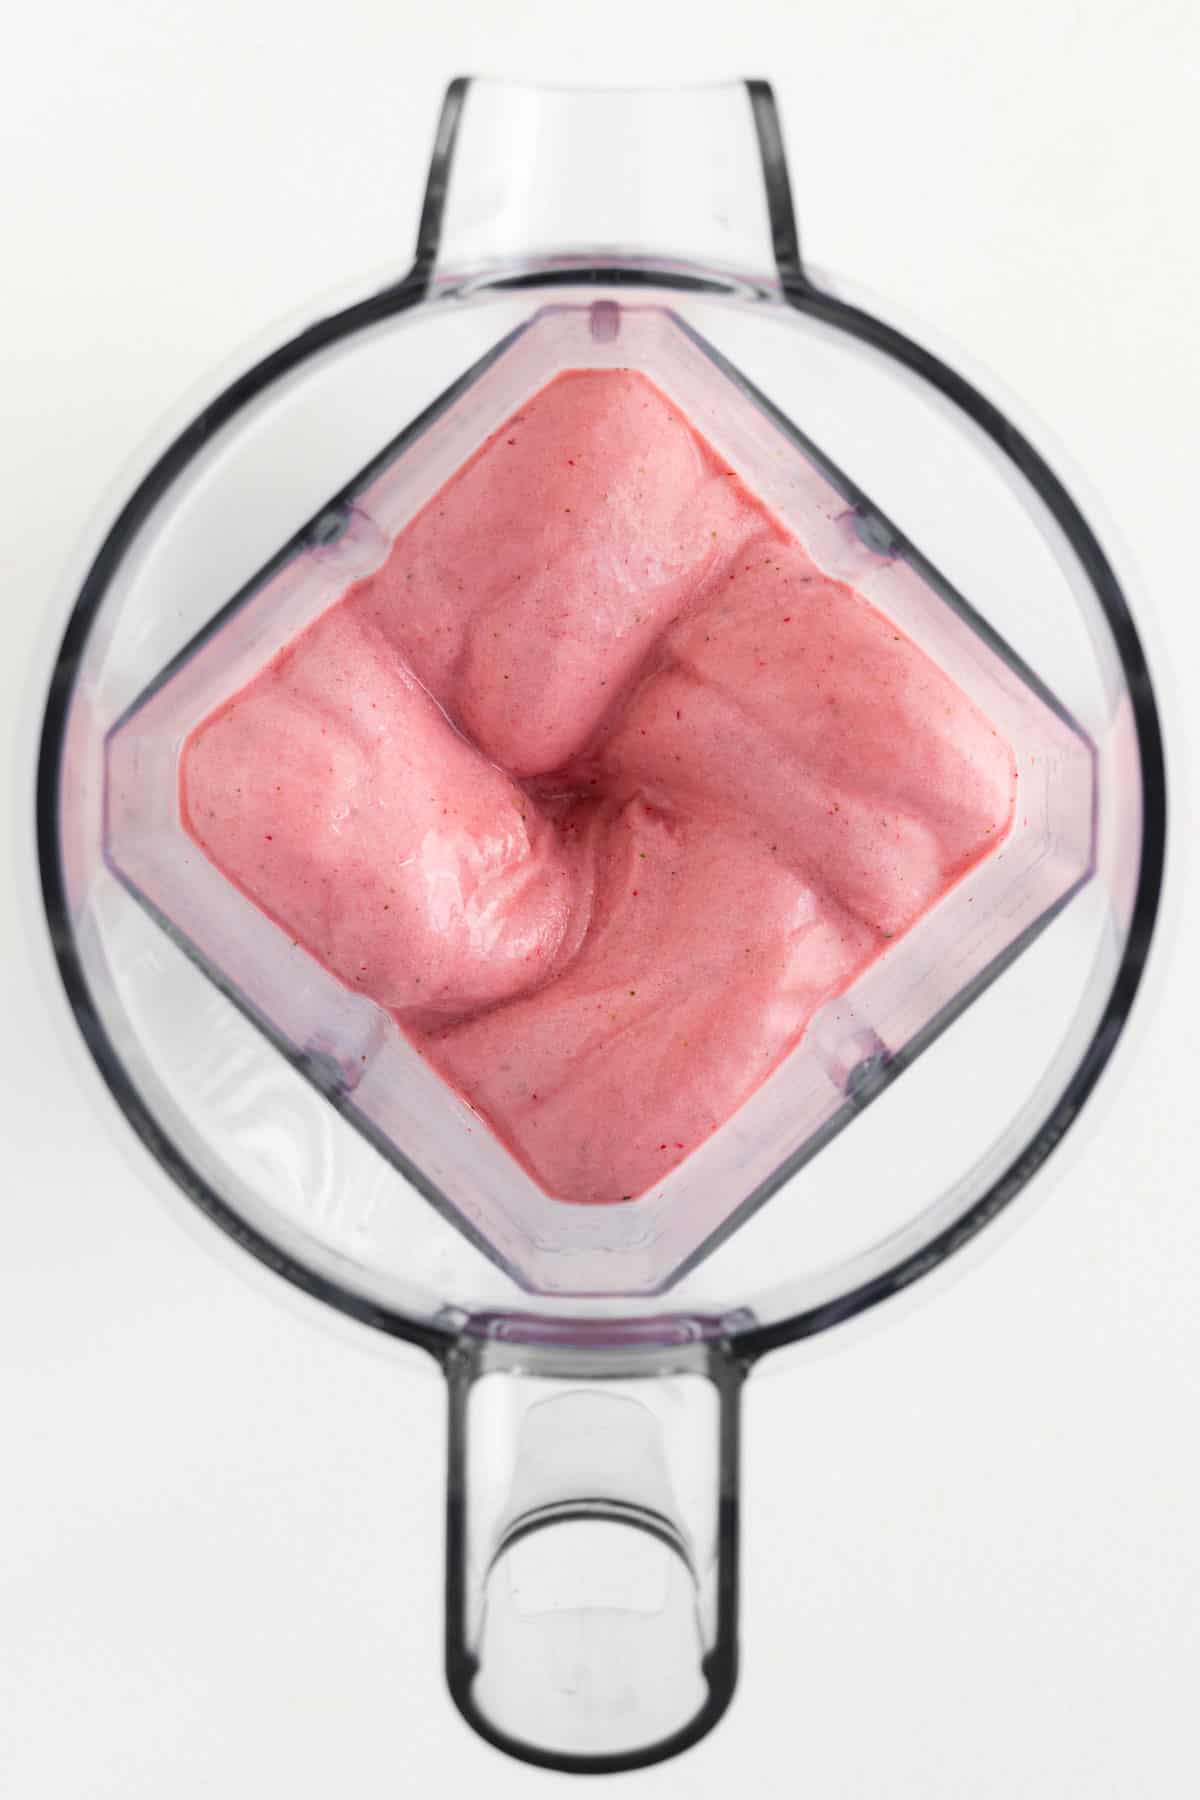 a creamy pink smoothie swirled inside a blender